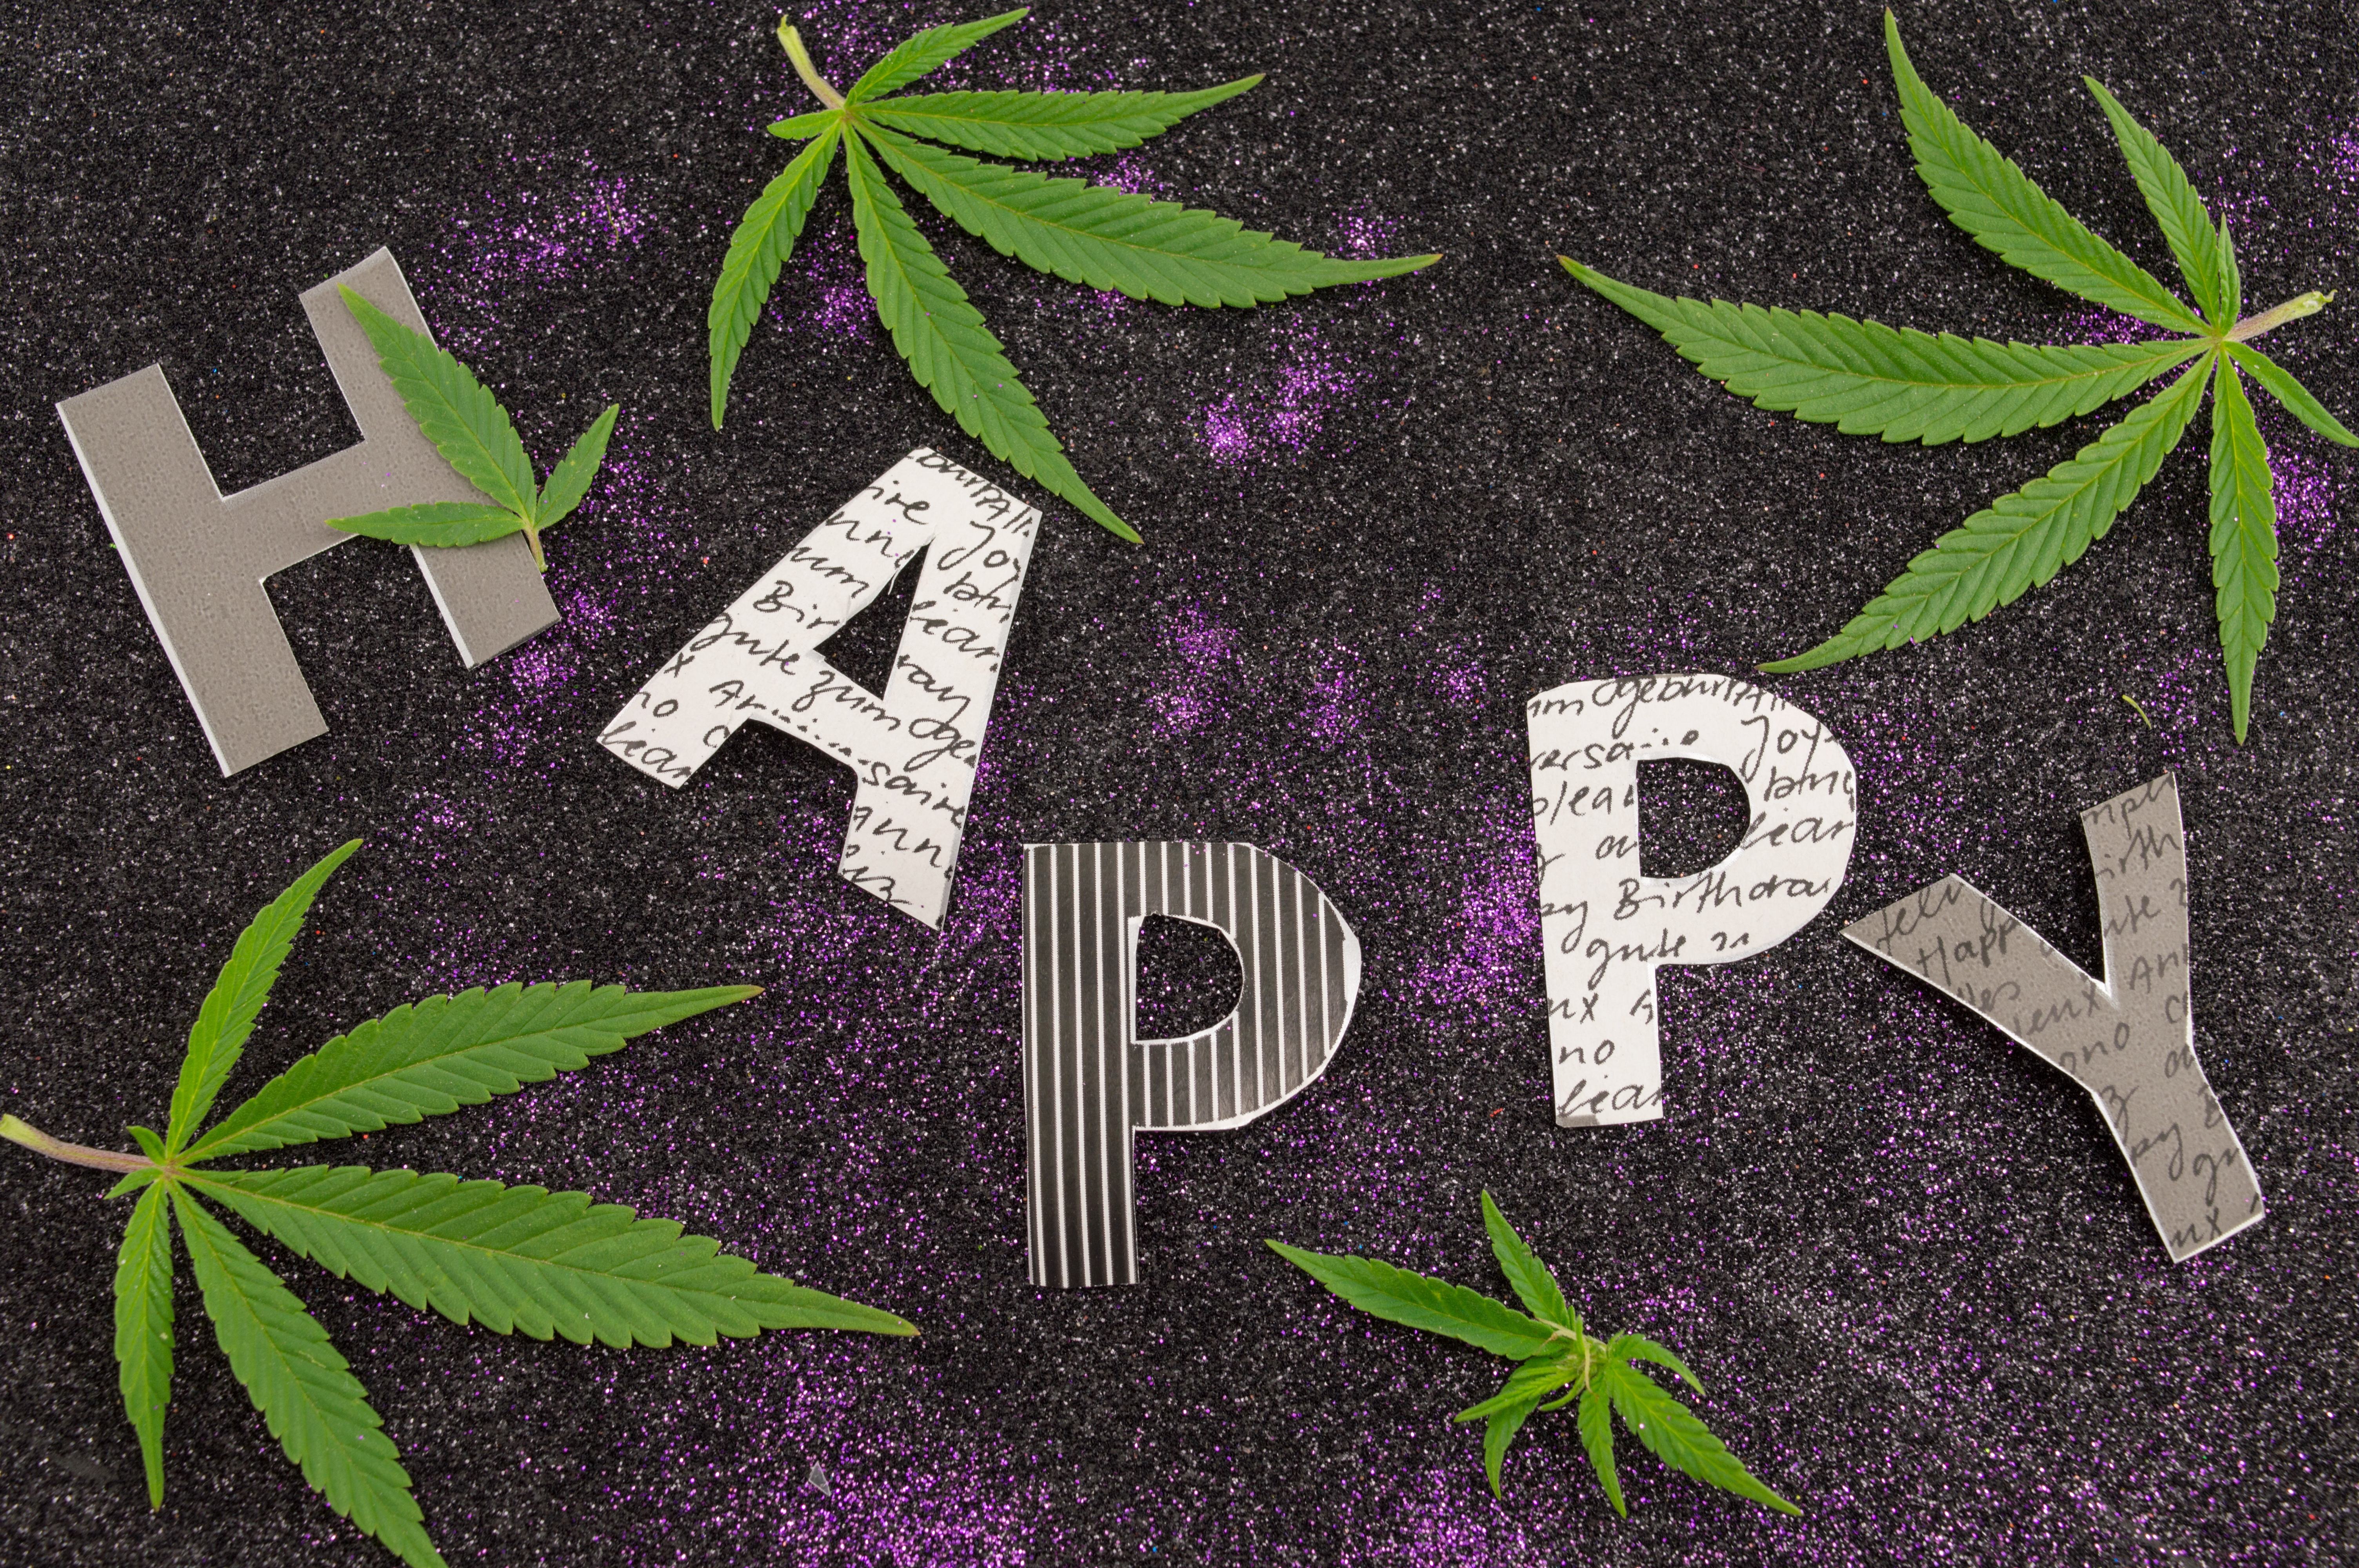 Party letters spell the wordy happy with marijuana leaves surrounding them.